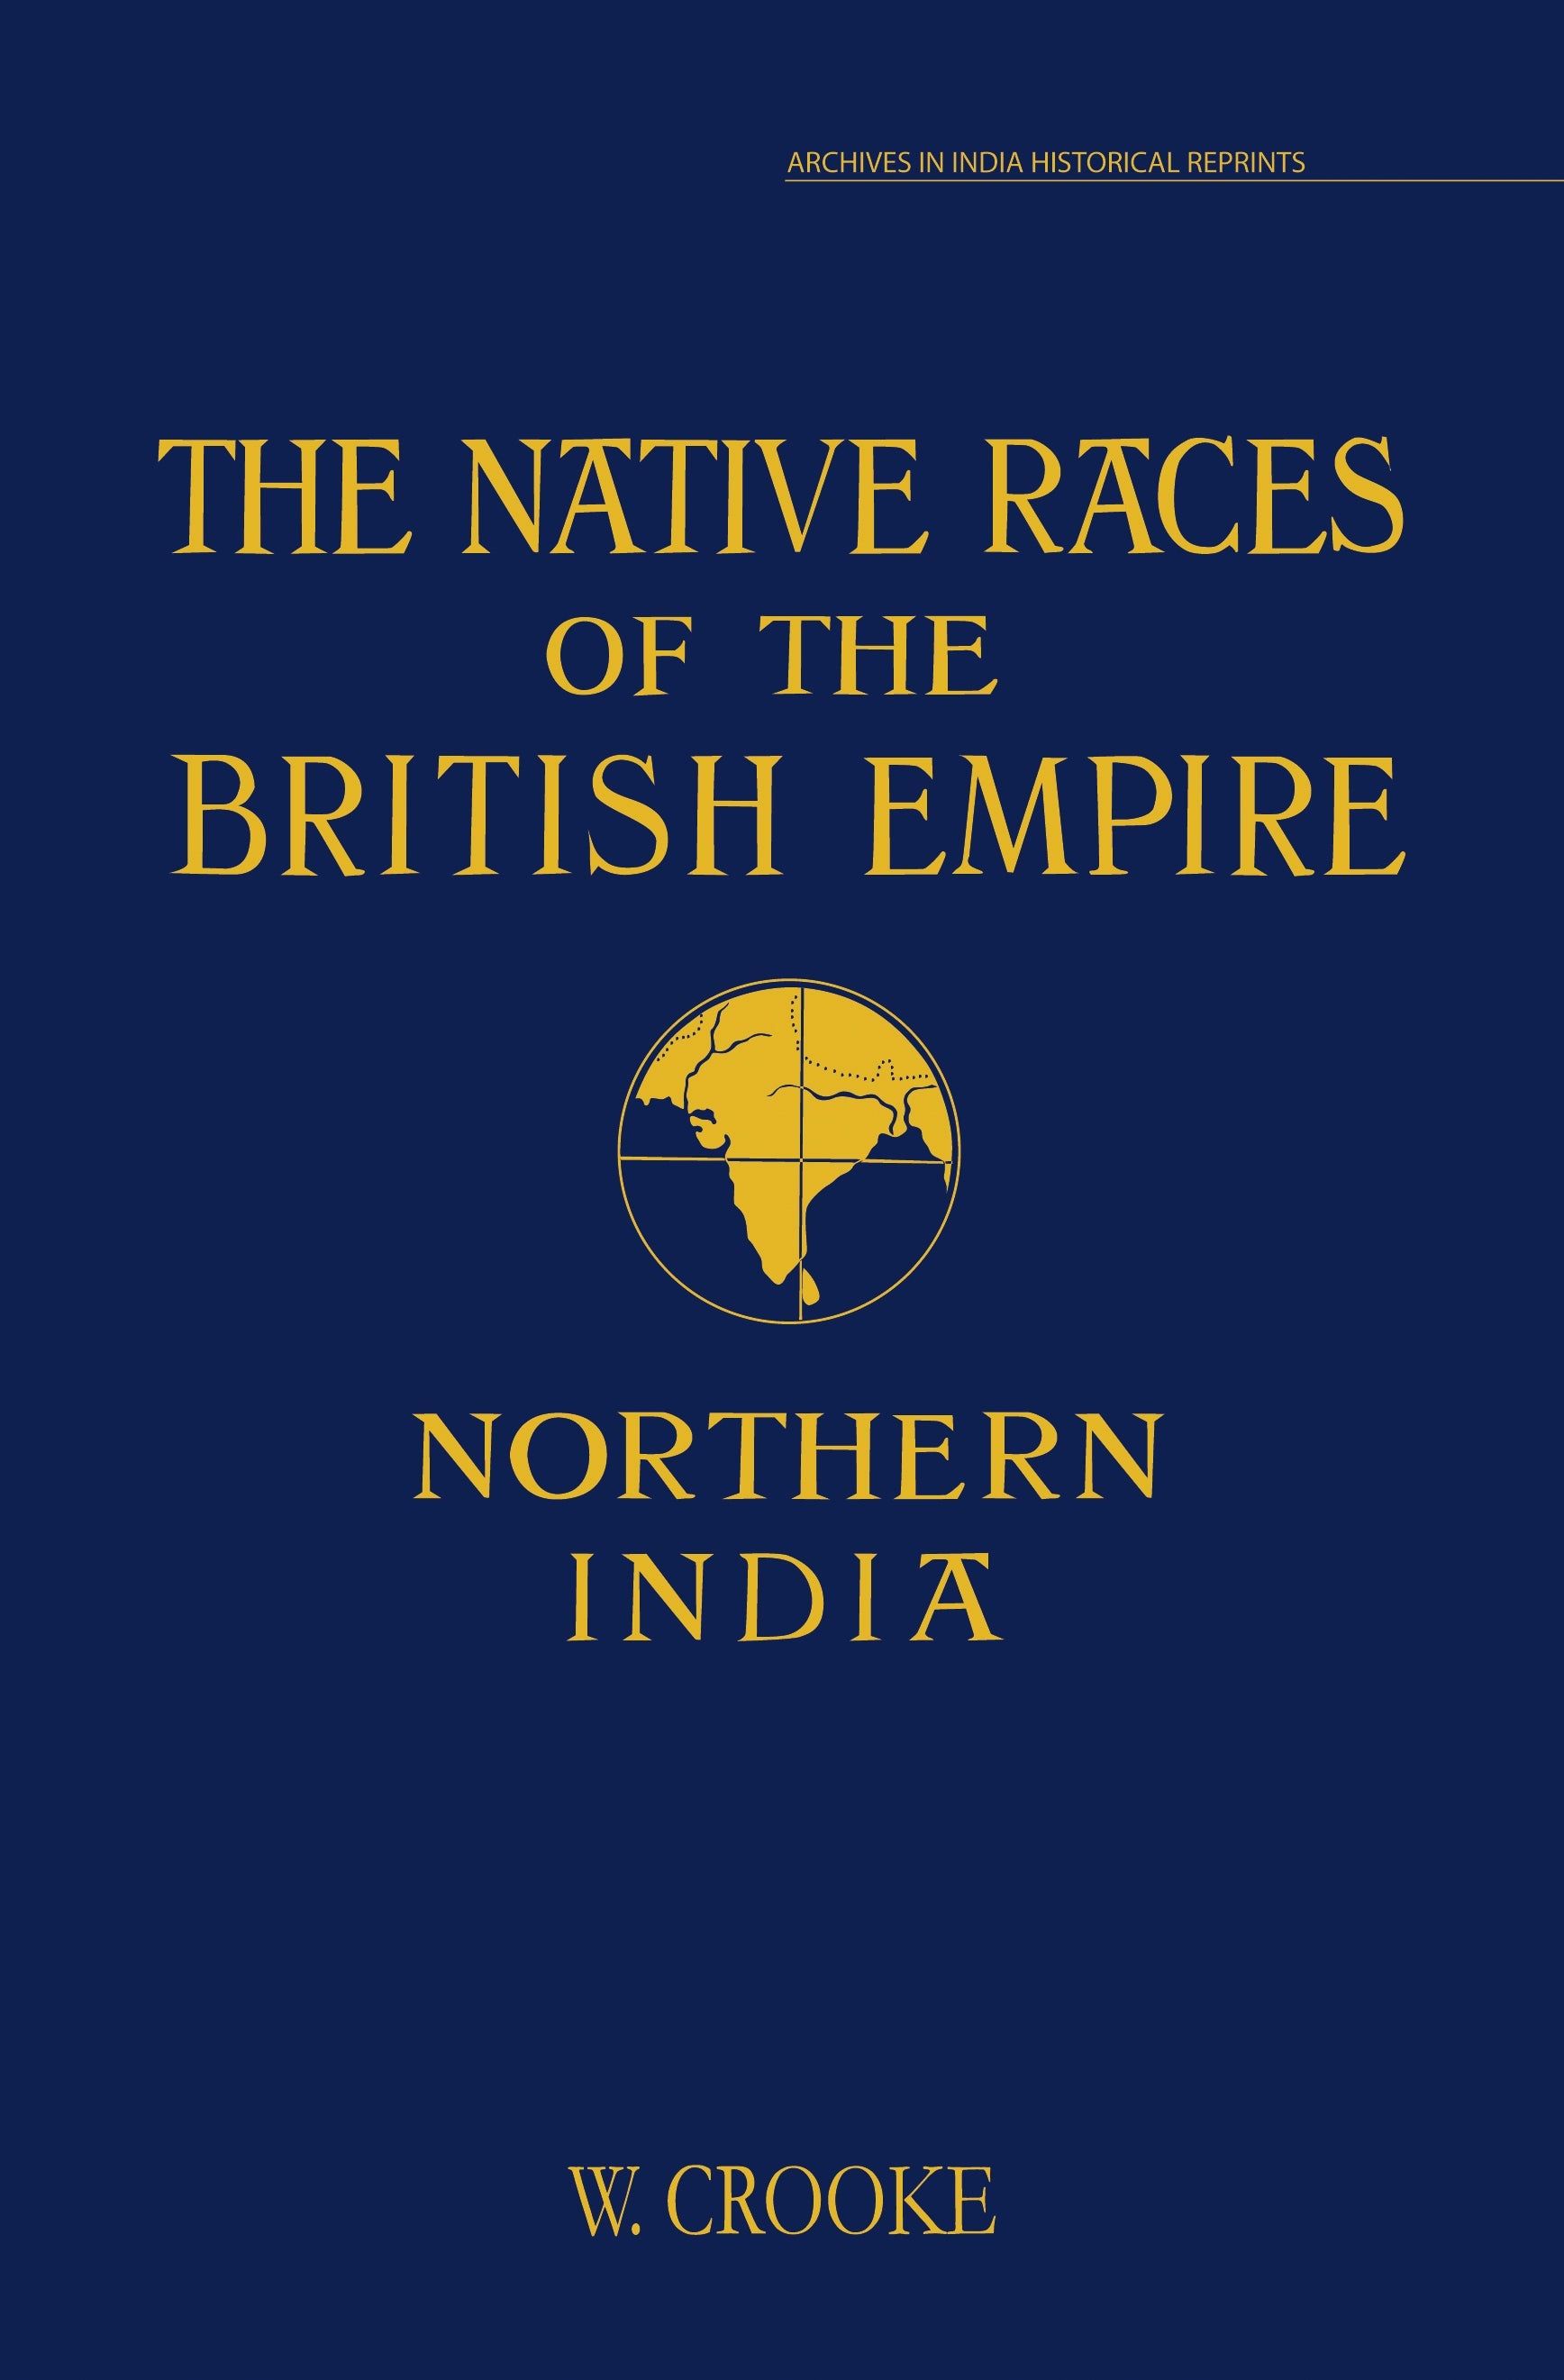 The Native Races of the British Empire